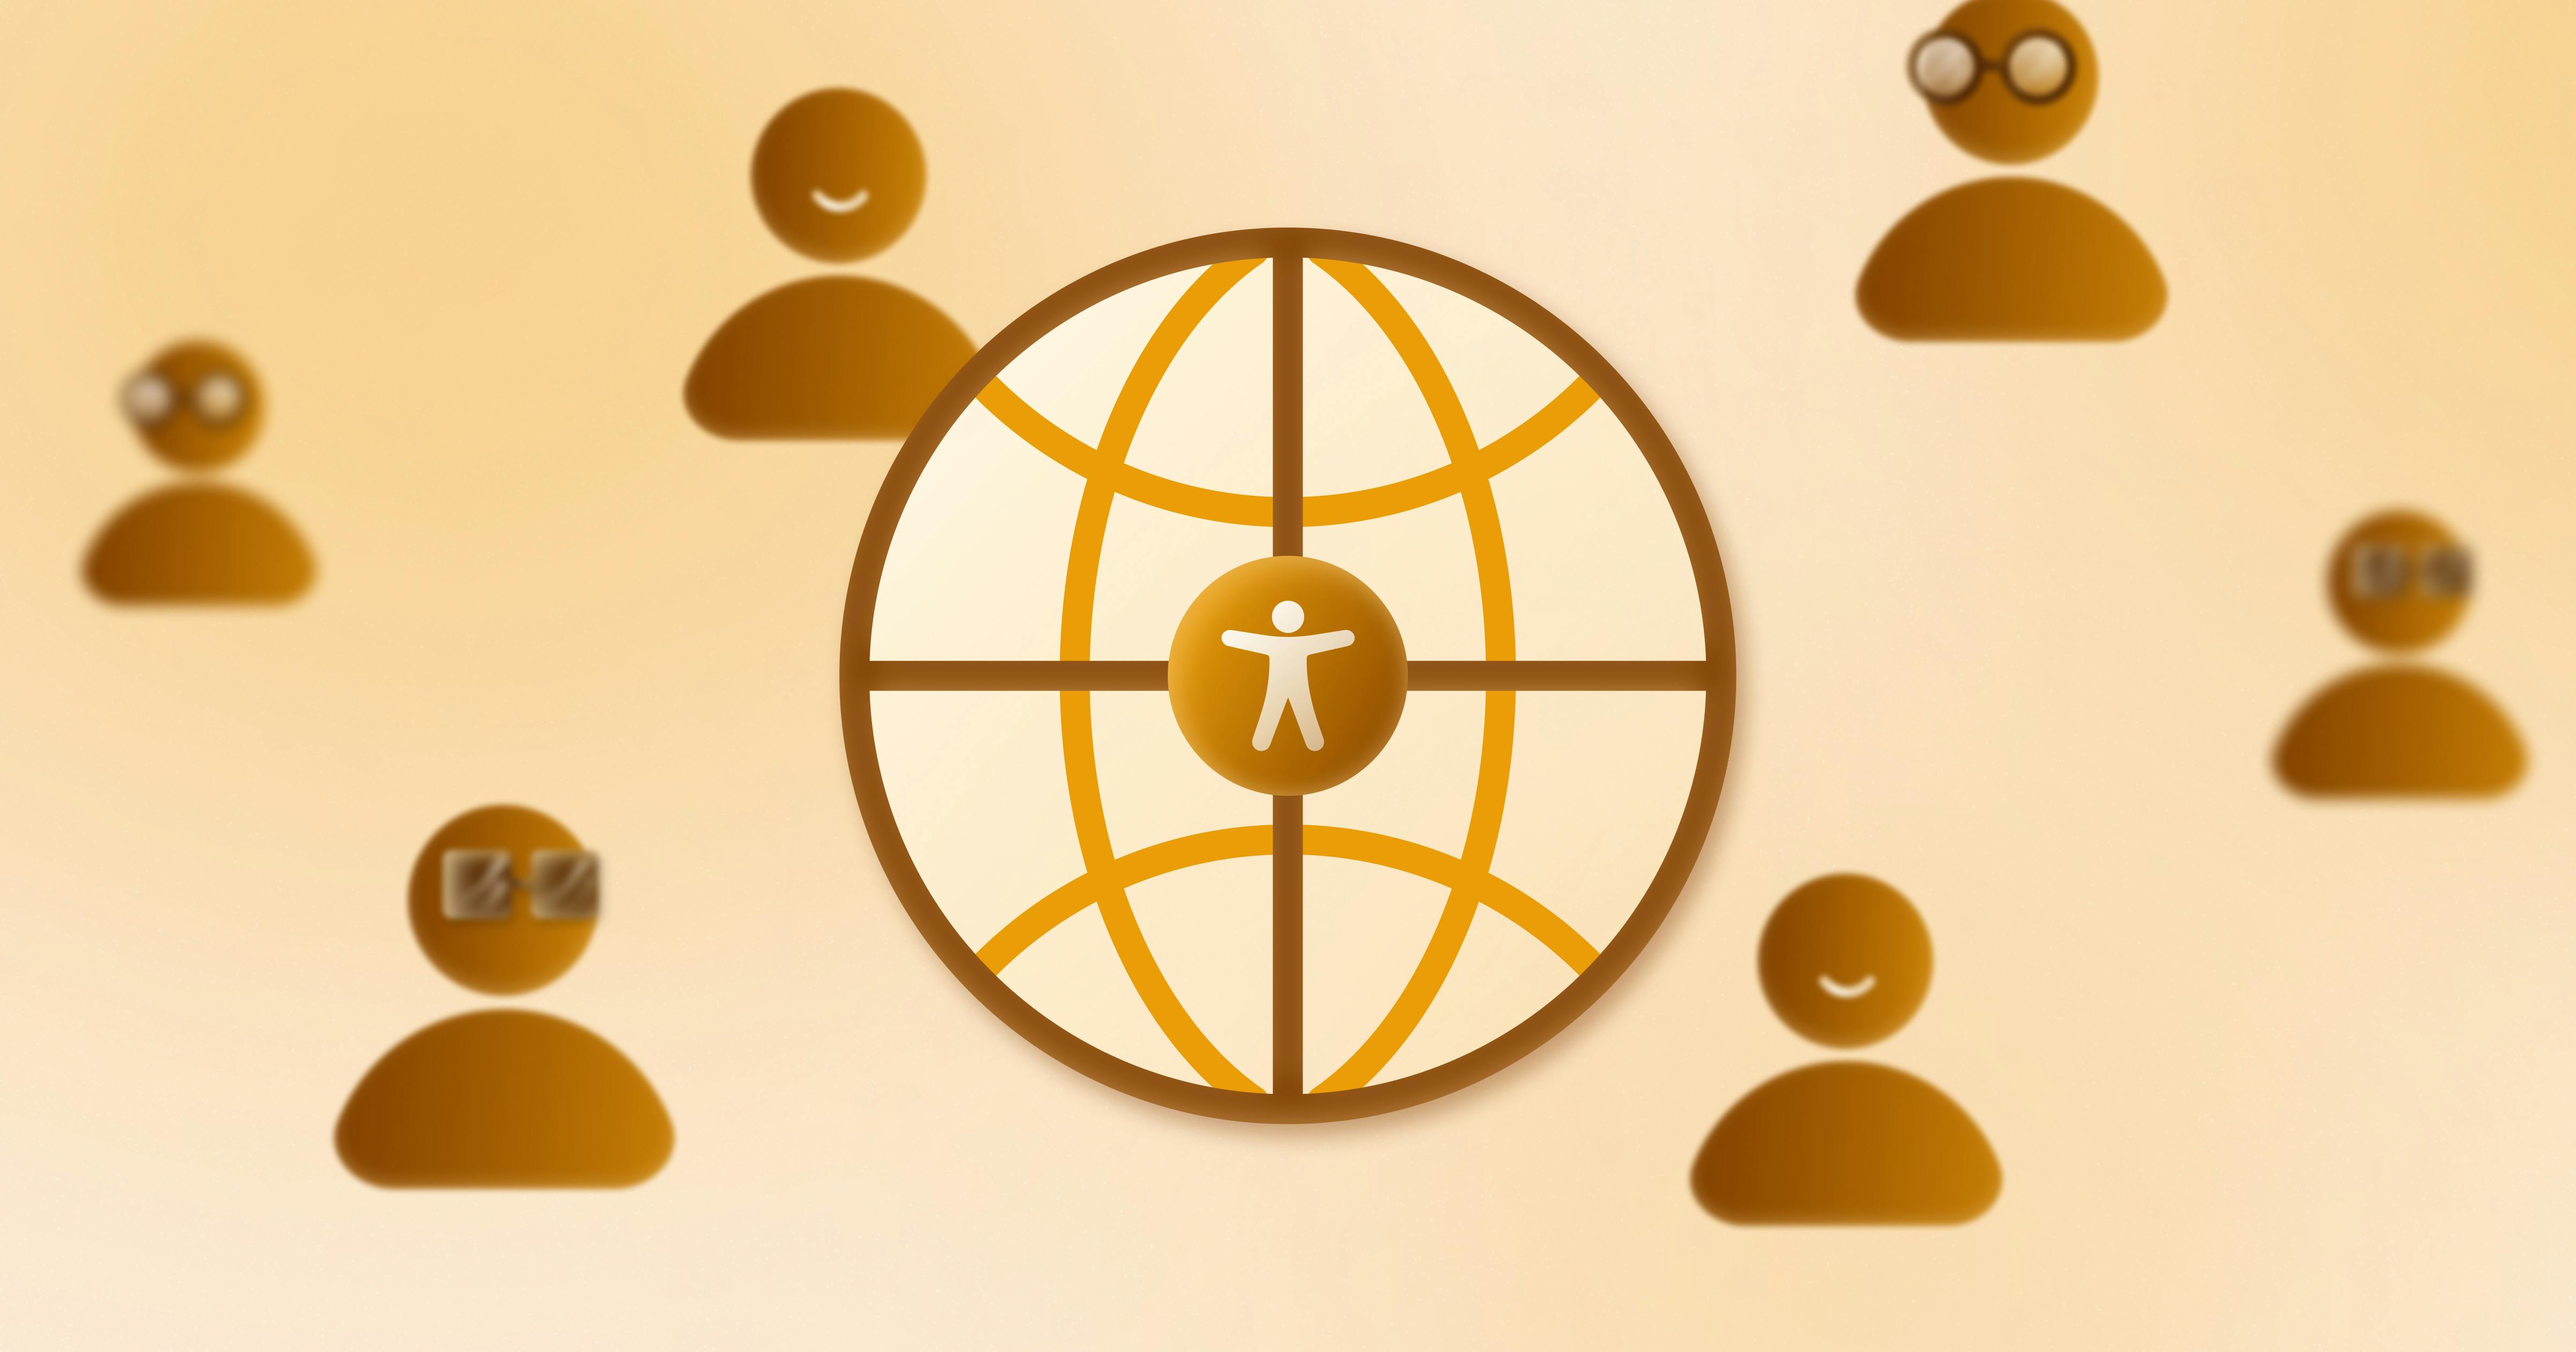 Six icons of people surrounding a globe with an accessibility symbol in the center.